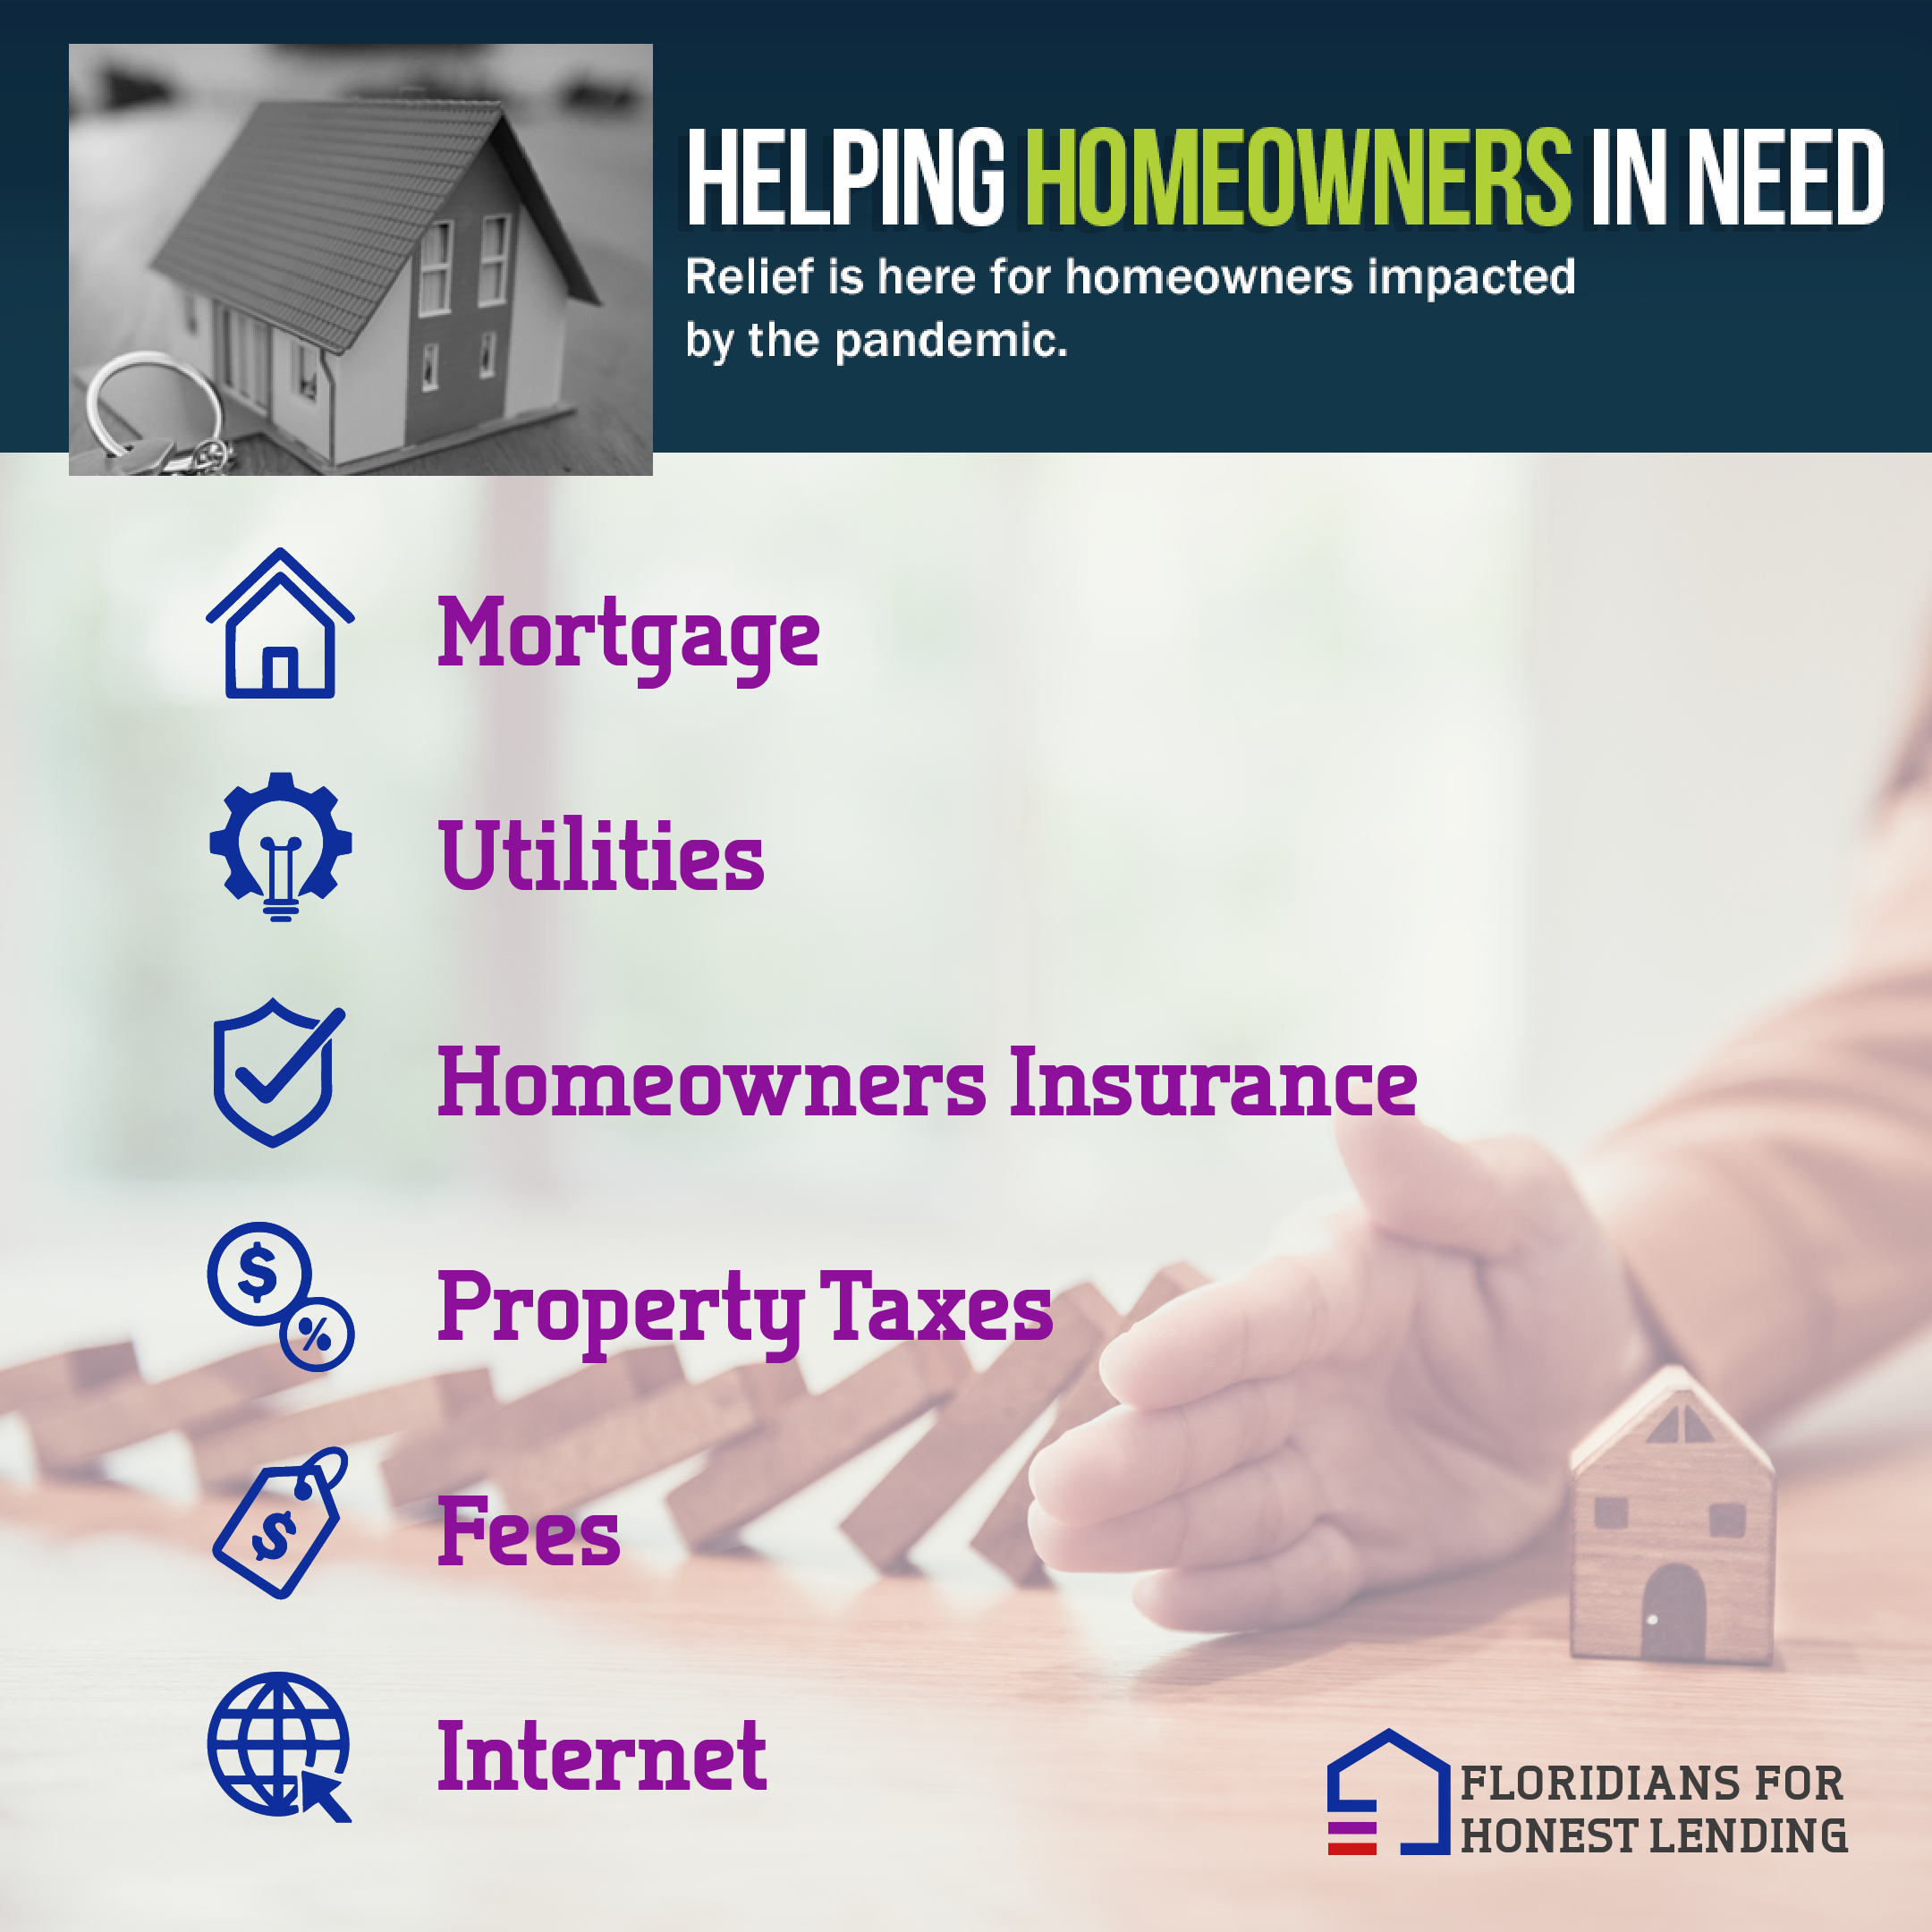 HAF funds can be used for: Internet, Fees, Property Taxes, Homeowners Insurance, Utilities, Mortgage